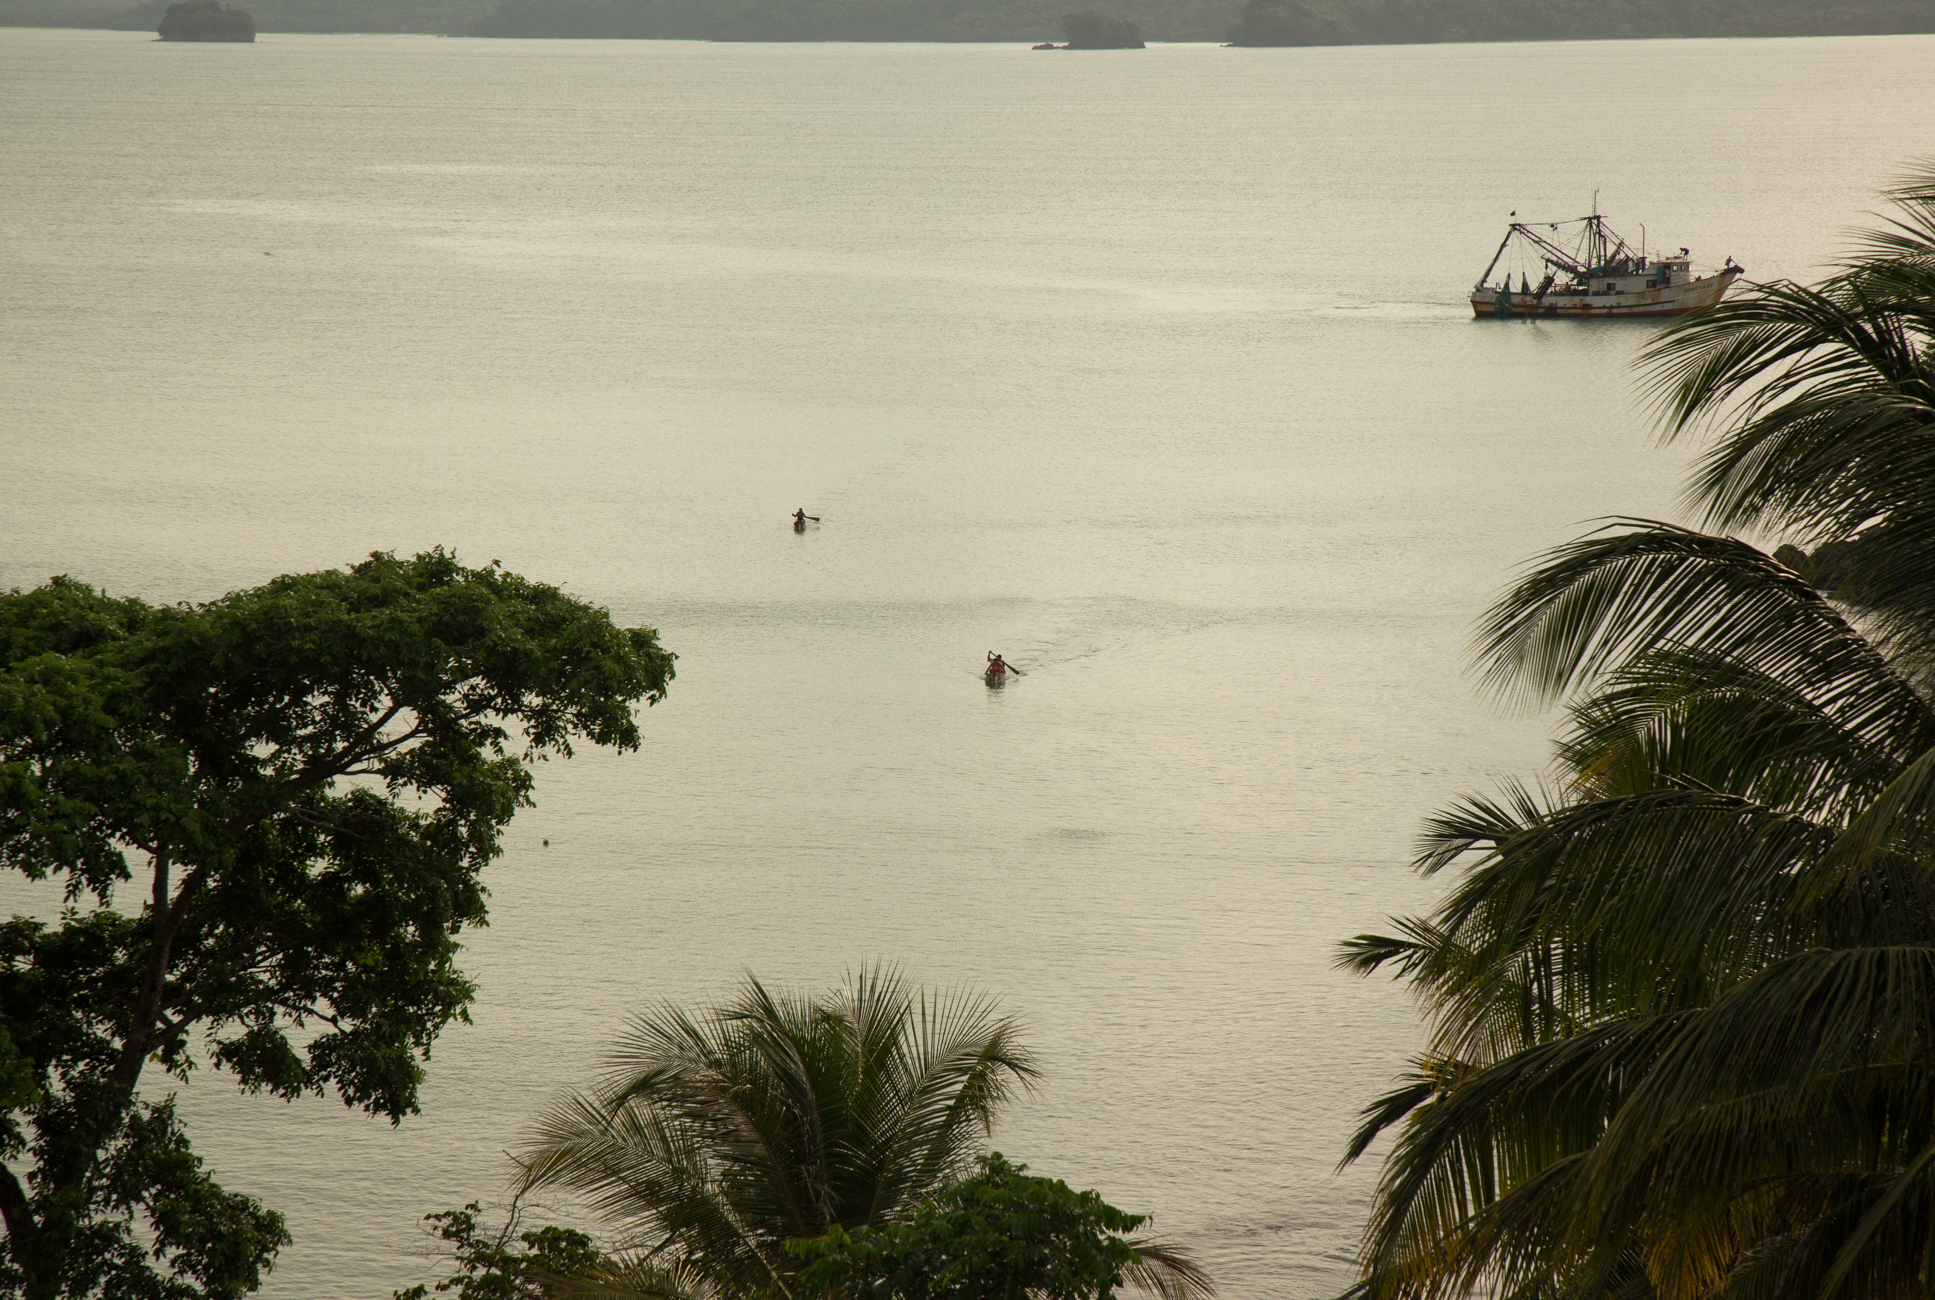  Fisherman paddle back to shore from a shrimping boat off the coast of Monkey point, an afro-kriol community on Nicaragua's southeastern Caribbean coast. 